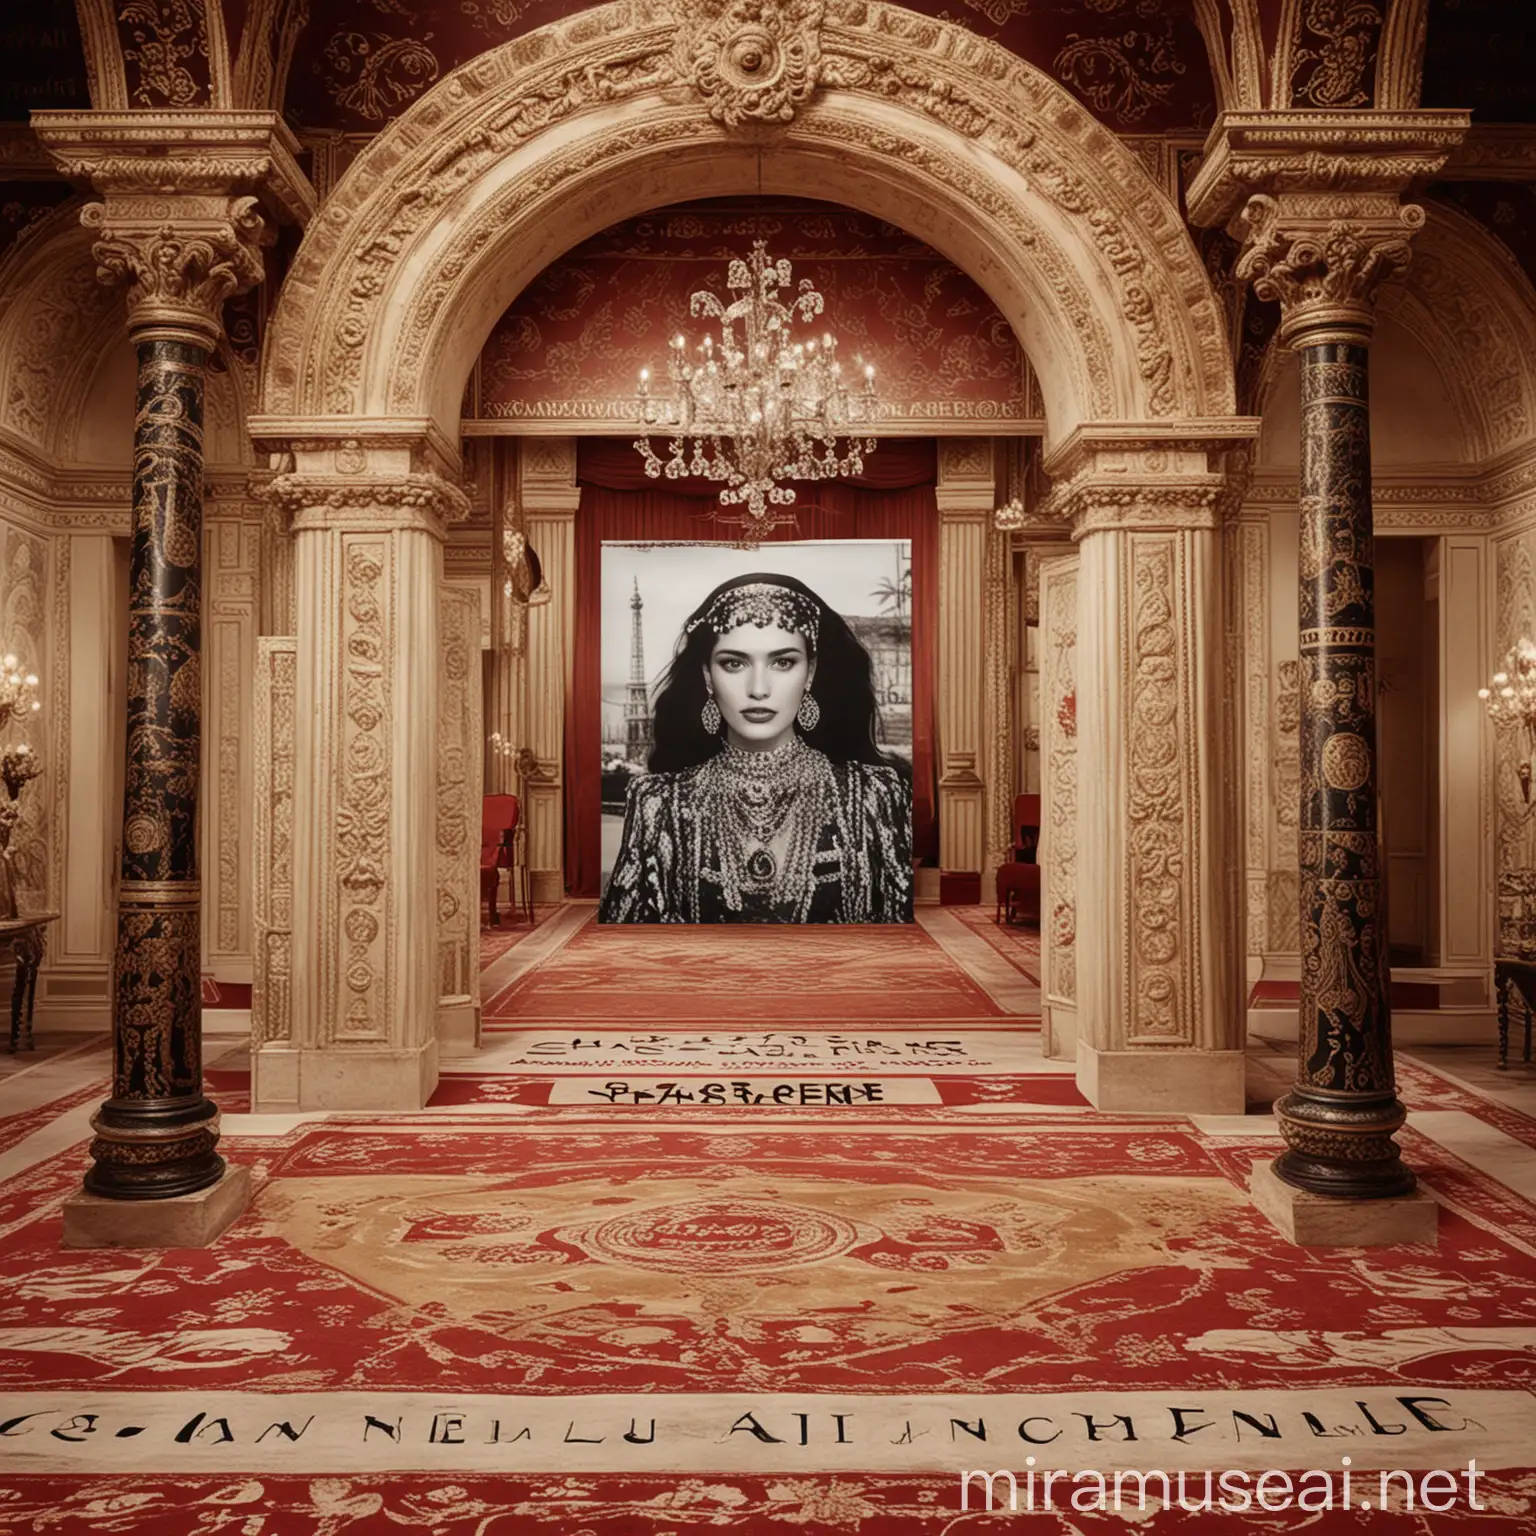 Chanel and Cartier Collection Ads Inspired by Mahkama du Pacha Palace in Casablanca